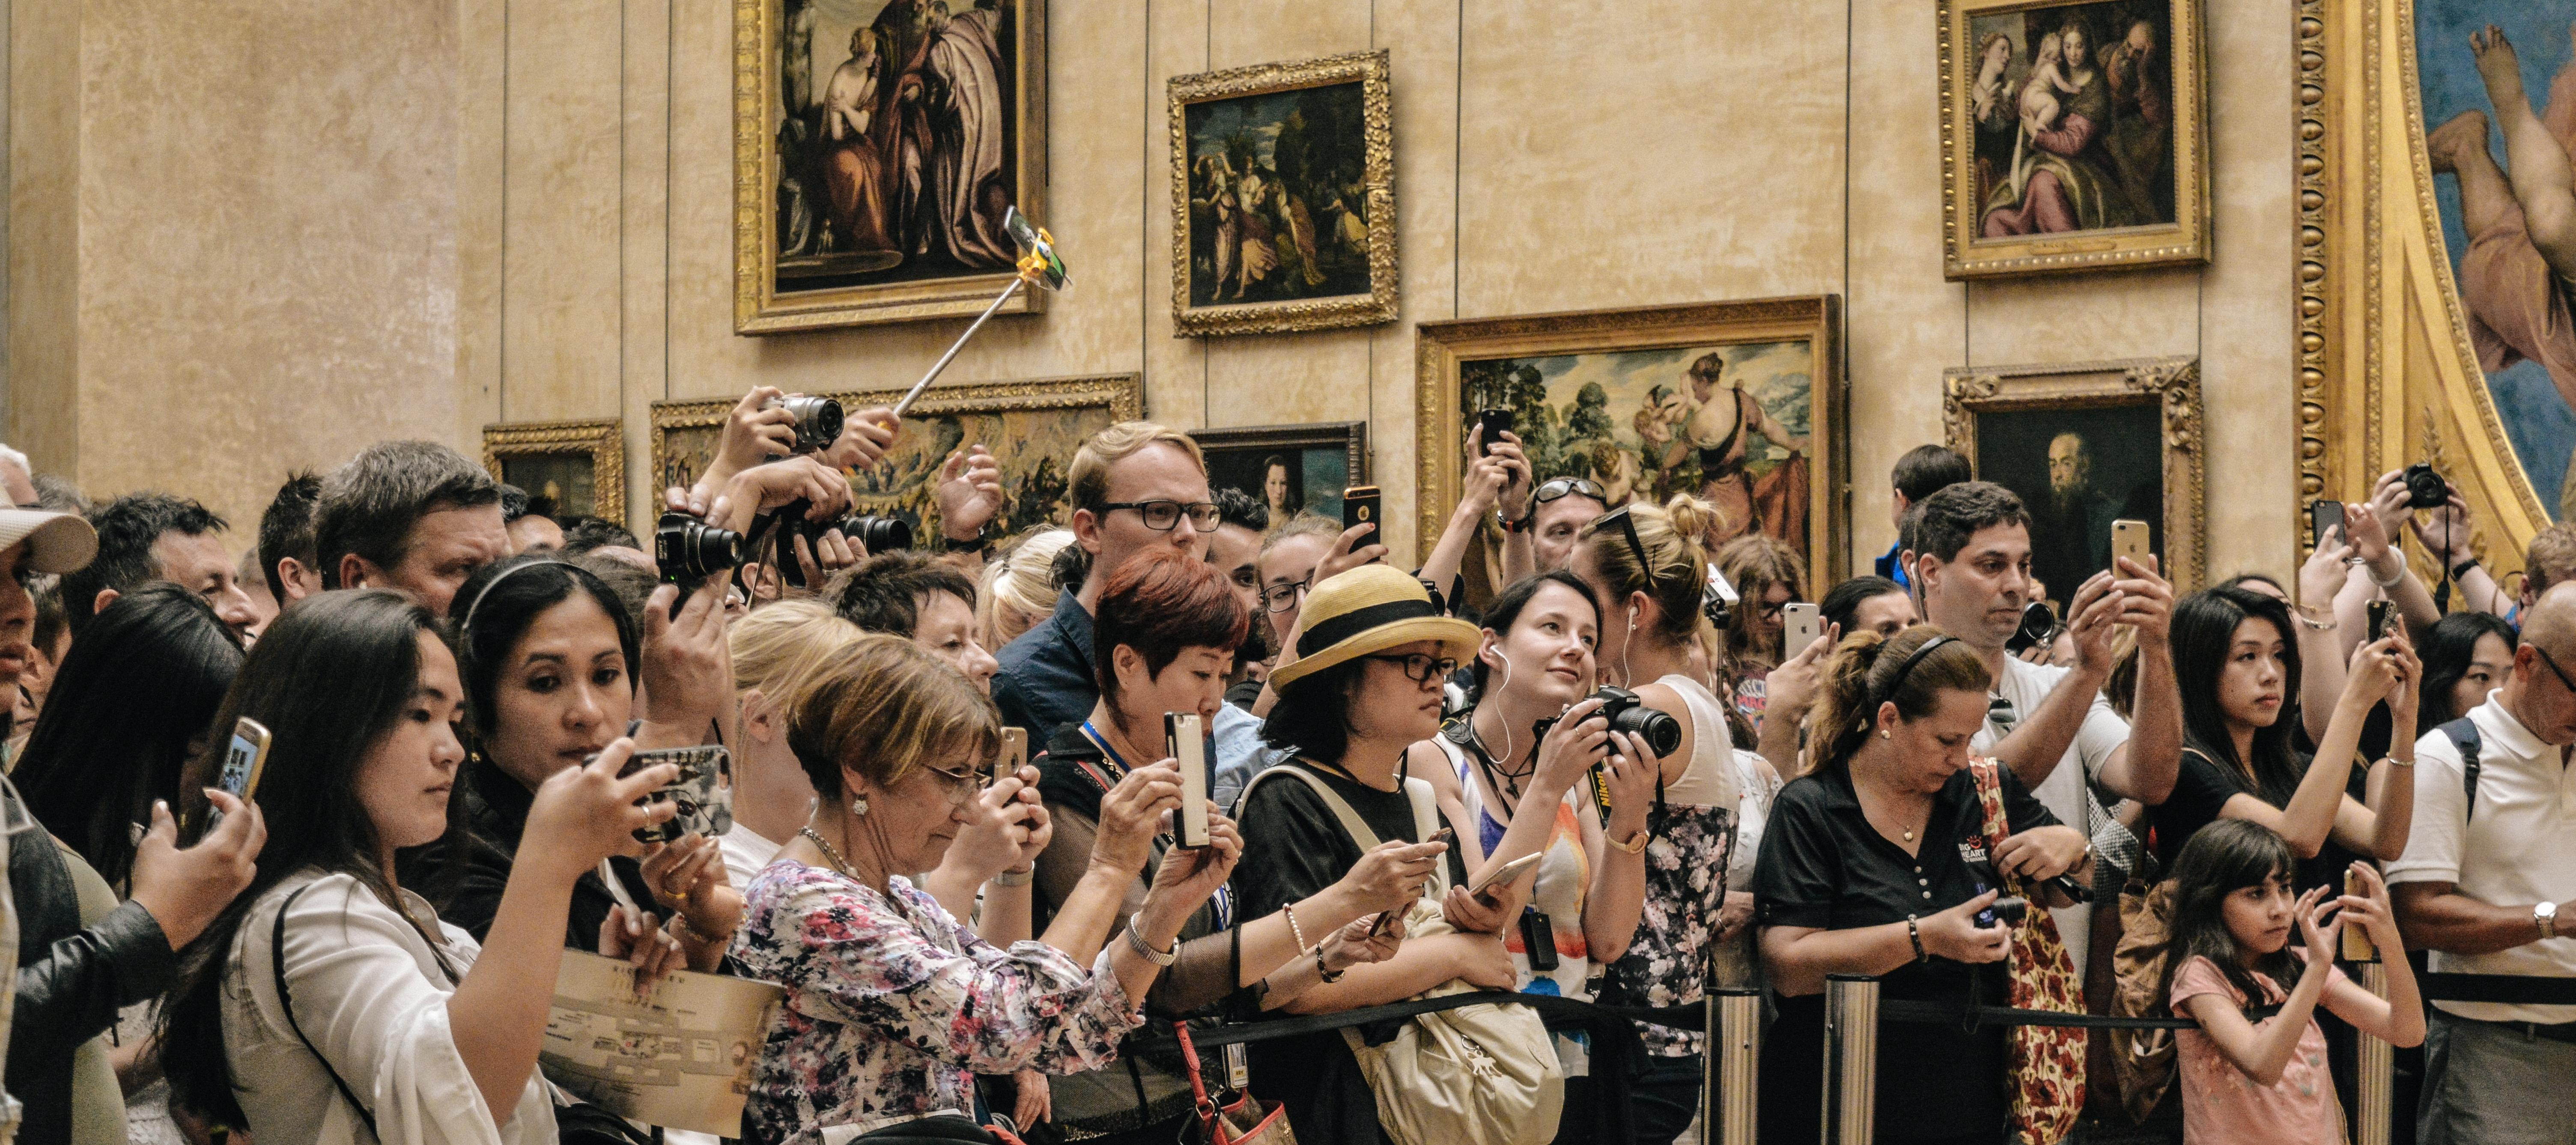 Crowd at The Louvre in Paris